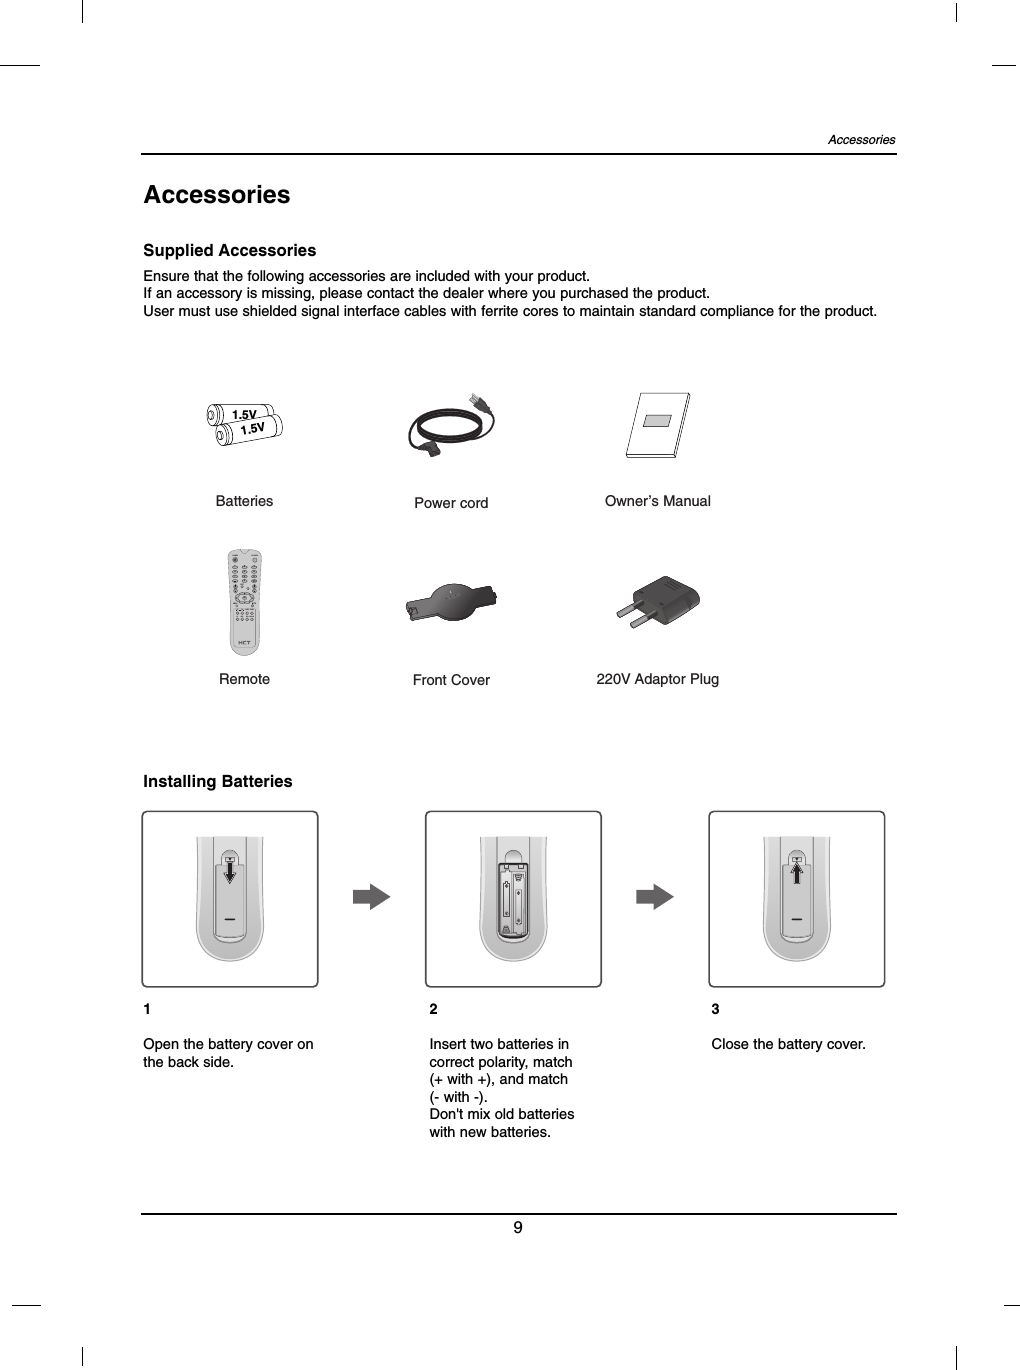 Accessories9AccessoriesEnsure that the following accessories are included with your product.If an accessory is missing, please contact the dealer where you purchased the product.User must use shielded signal interface cables with ferrite cores to maintain standard compliance for the product.Supplied AccessoriesInstalling Batteries1.5V1.5VBatteries Power cordFront CoverOwner’s Manual220V Adaptor Plug1 2 34 5 67 8 90EXITVOL CHMENU MUTEOKSOURCEPOWERSLEEP ZOOMIPI ISIEPGMTSCC DISPLAYRemote1Open the battery cover onthe back side.2Insert two batteries incorrect polarity, match (+ with +), and match(- with -).Don&apos;t mix old batterieswith new batteries.3Close the battery cover.